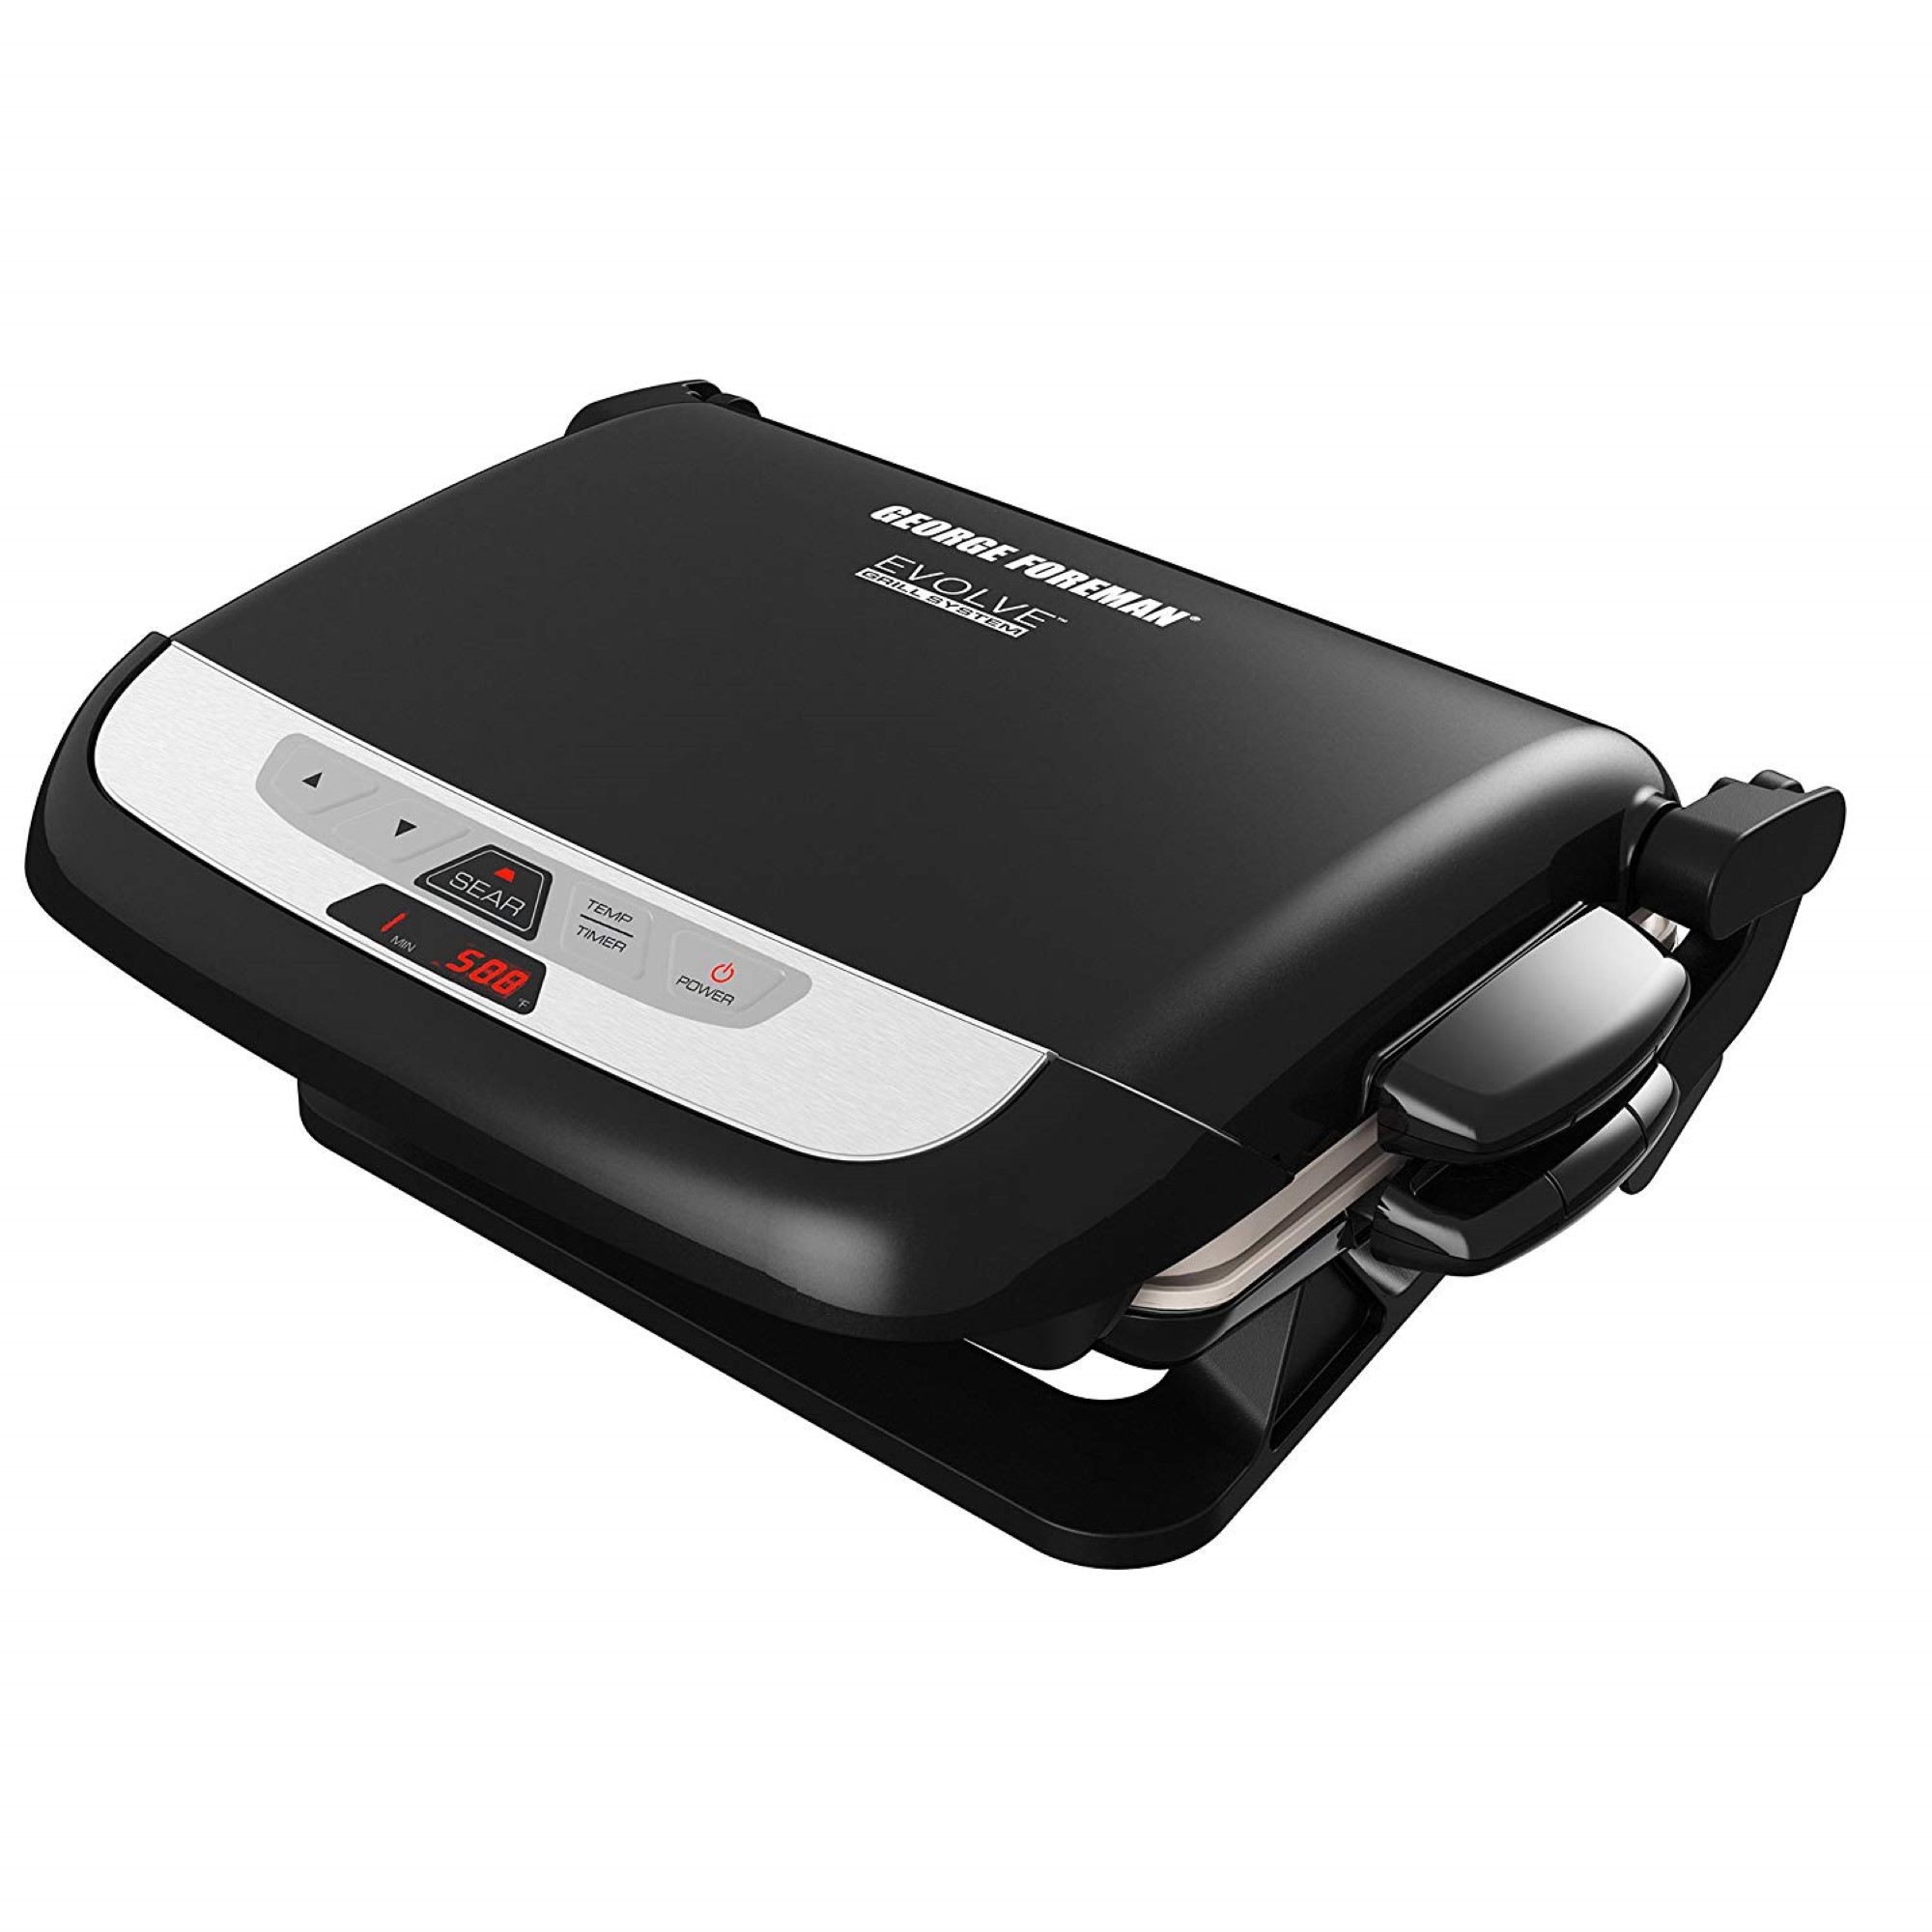 George Foreman 5-Serving Evolve Grill With Waffle Plates And Ceramic Grill Plates Black - image 1 of 5